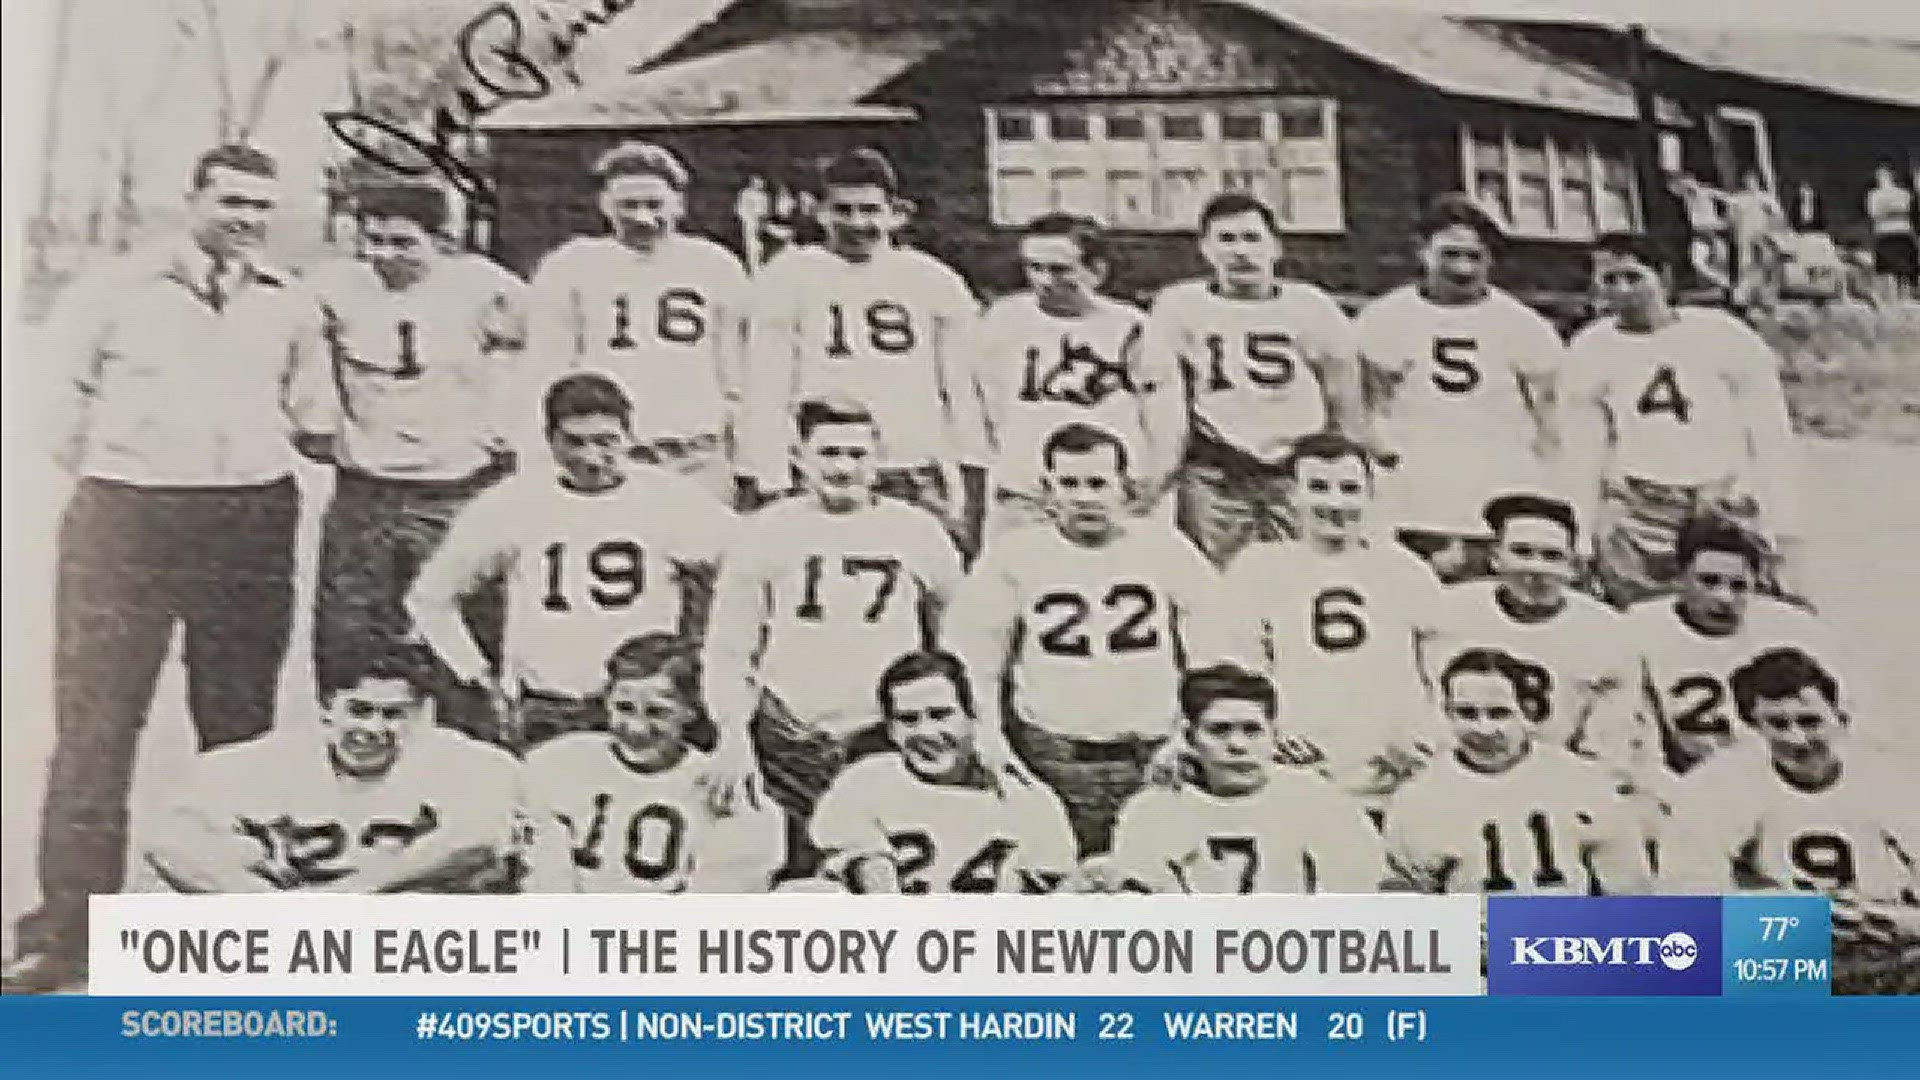 Week 3: 'Once an Eagle' The History of Newton Football